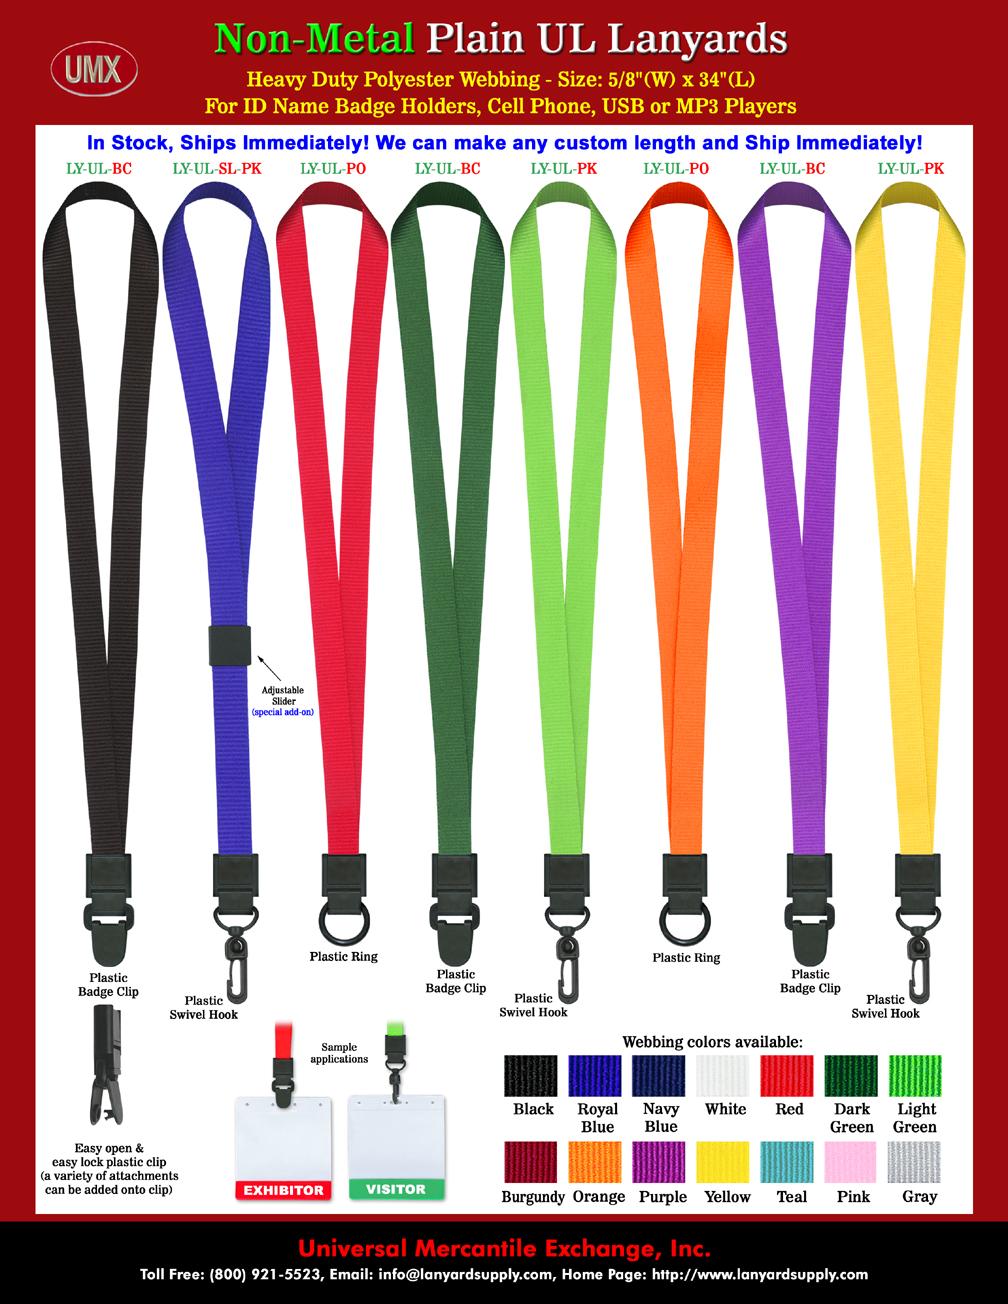 Non-Metal Plain Color Universal Link Lanyards - 5/8" Scan-Safe Lanyards With 13-Colors In Stock.